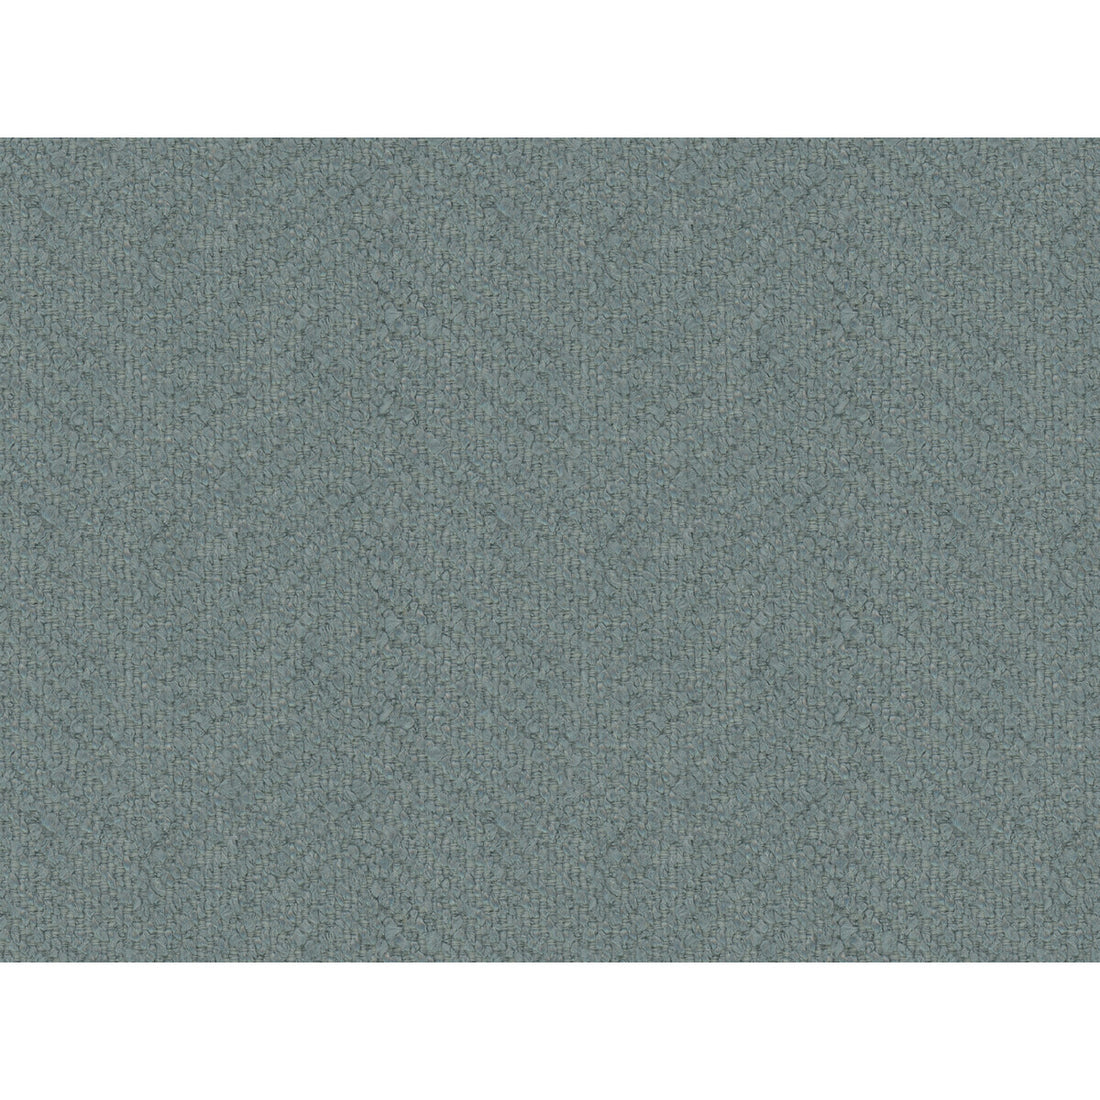 Kravet Smart fabric in 34631-15 color - pattern 34631.15.0 - by Kravet Smart in the Performance Crypton Home collection